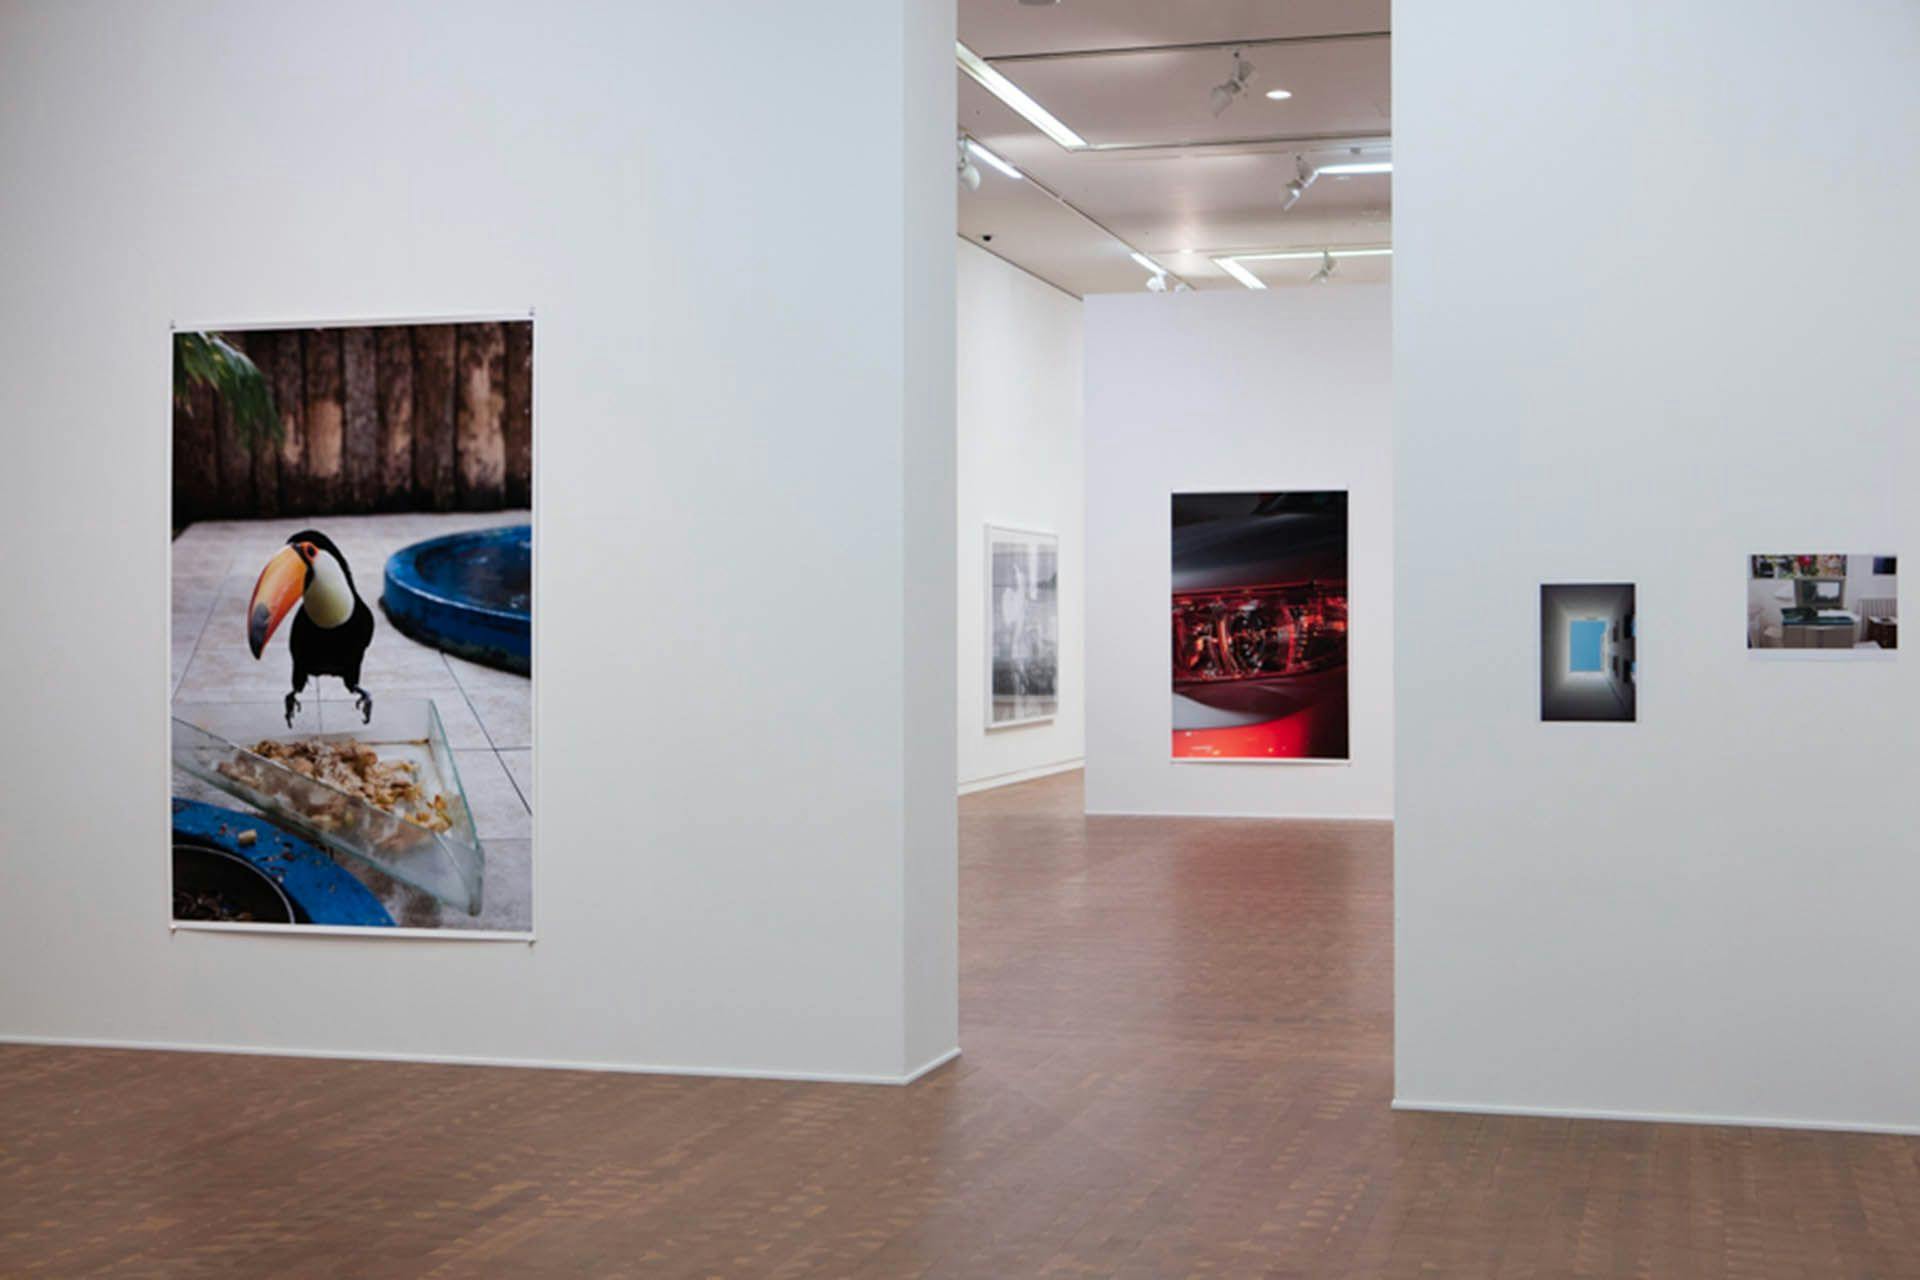 Installation view of Wolfgang Tillman's exhibition Your Body is Yours at the National Museum of Art, Osaka, dated 2015.